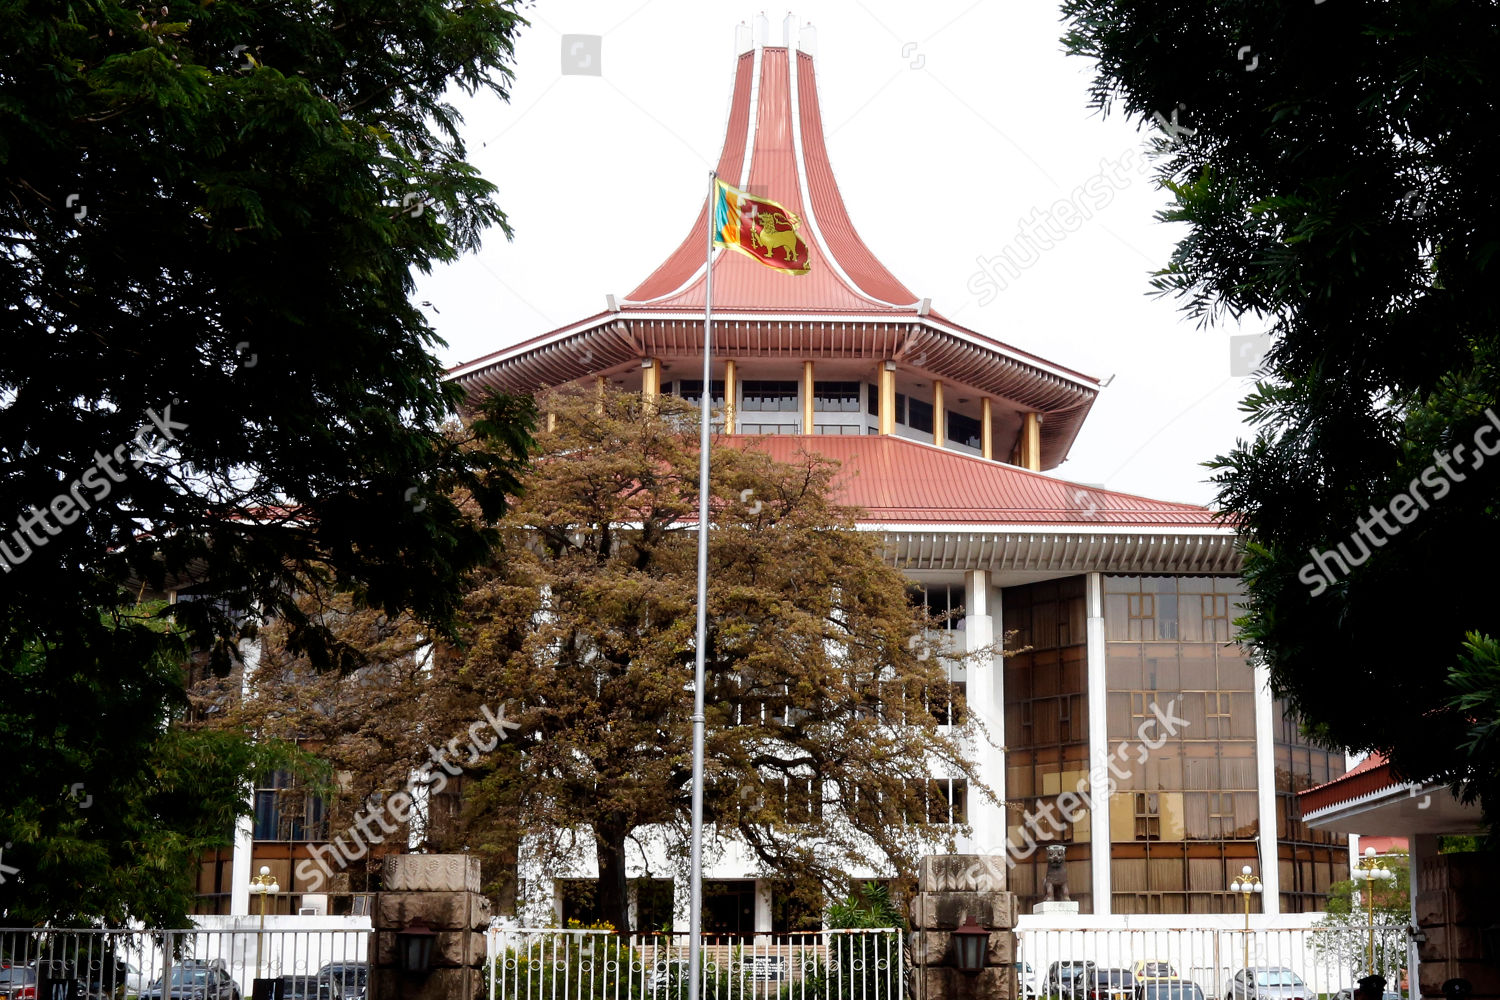 Mandatory Credit: Photo by M A PUSHPA KUMARA/EPA-EFE/Shutterstock (10033316c)
Supreme Court complex in Colombo, Sri Lanka 13 December 2018. A seven judge-bench of Sri Lanka's Supreme Court unanimously ruled that the Gazette notification issued by President Maithripala Sirisena on 26 October 2018 dissolving Parliament was inconsistent with the constitution and such a dissolution could be made only when Parliament completes its four-and-a-half year term.
Sri Lanka's Supreme Court unanimously ruled dissolving Parliament was inconsistent with the constitution, Colombo - 13 Dec 2018